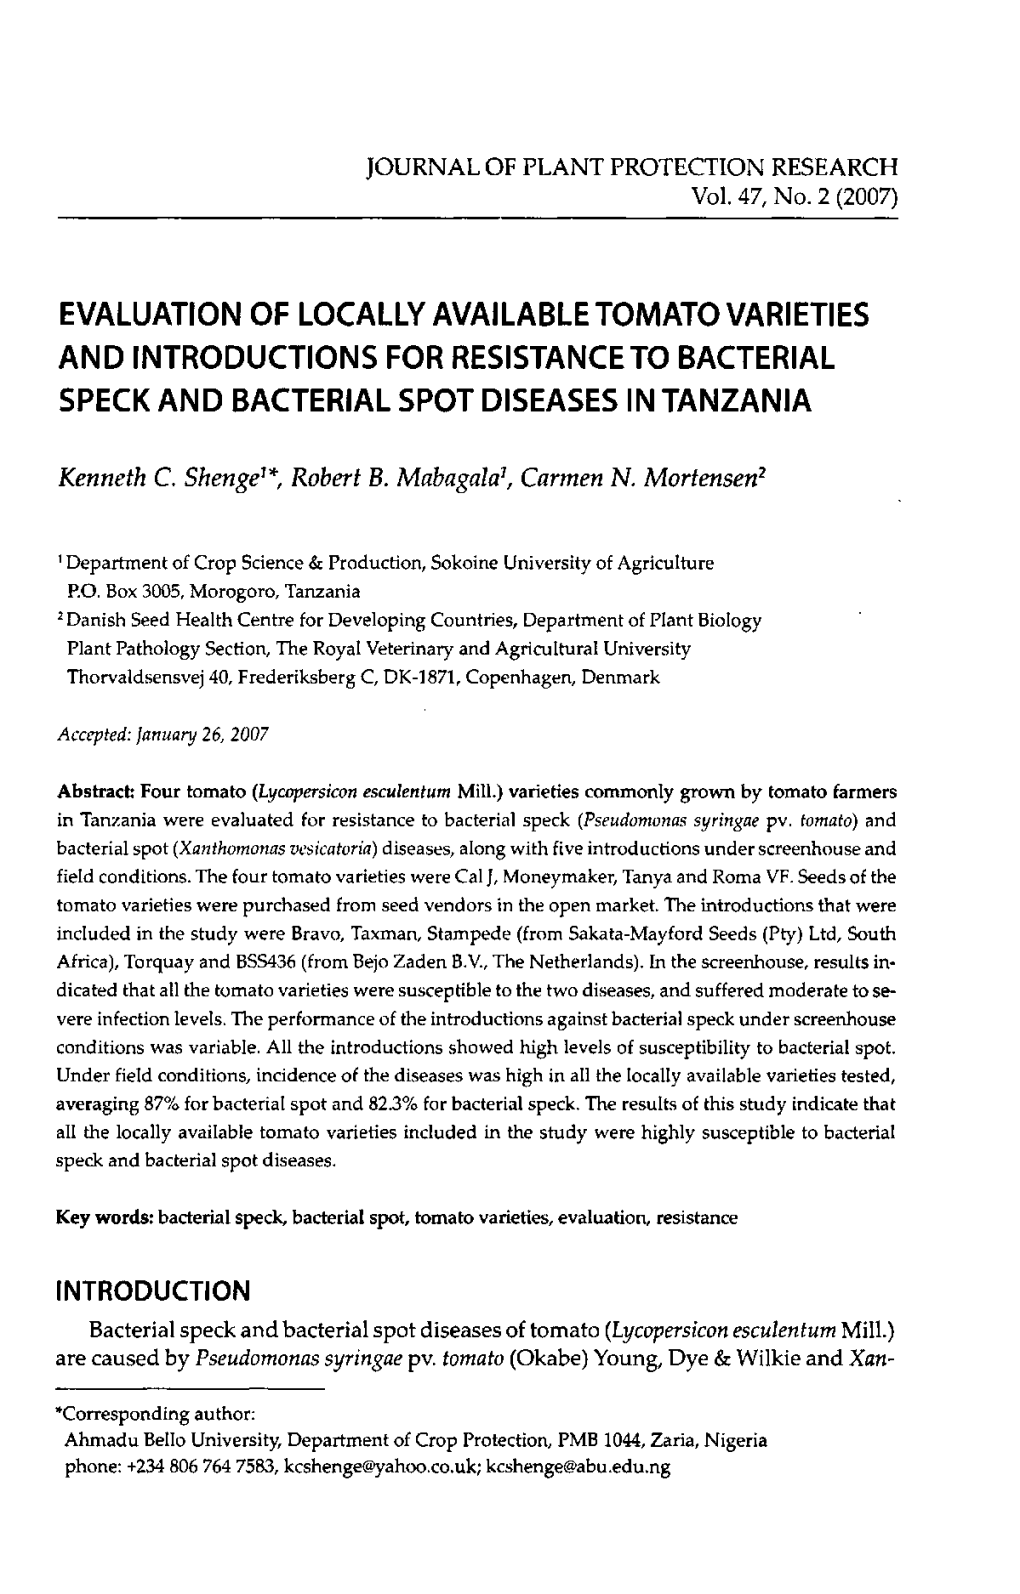 Evaluation of Locally Available Tomato Varieties and Introductions for Resistance to Bacterial Speck and Bacterial Spot Diseases in Tanzania